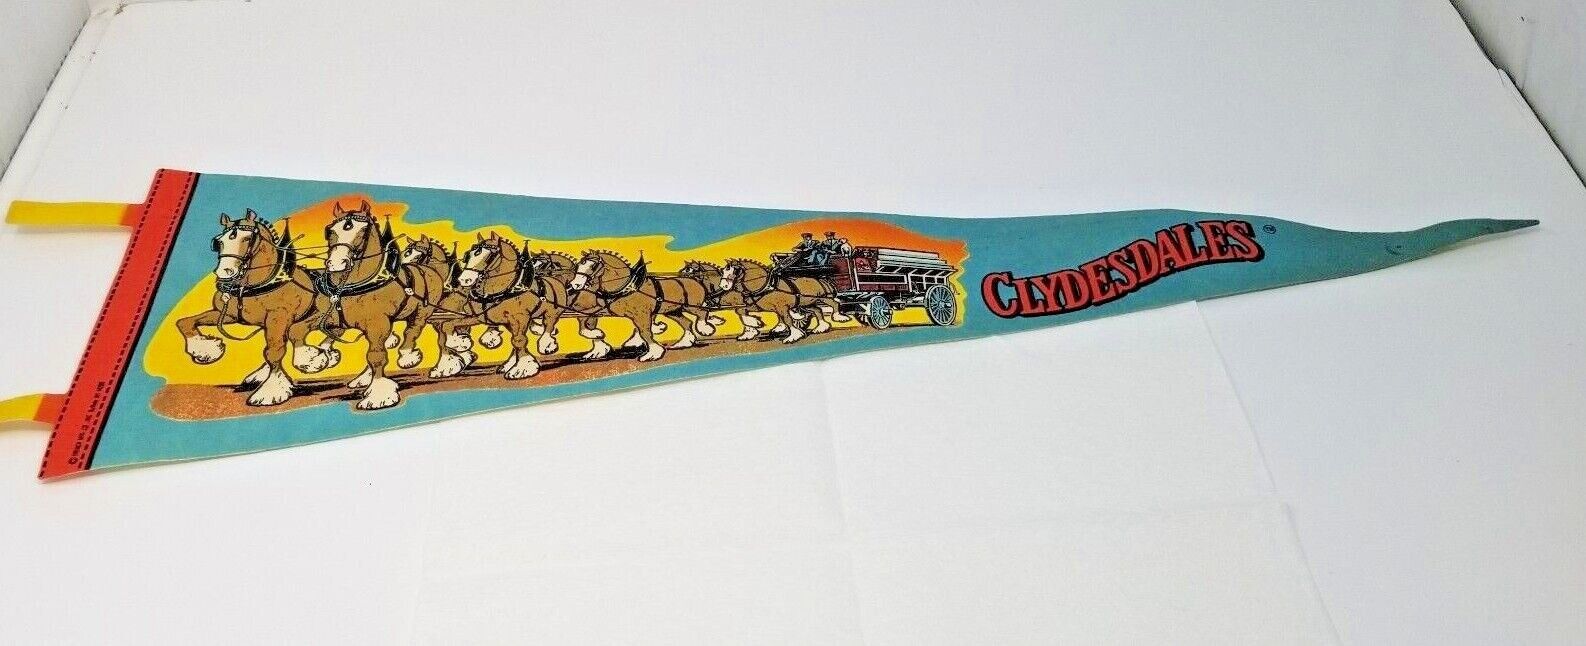 Felt Pennant Clydesdales Anheuser Busch Pulling Carriage 1960